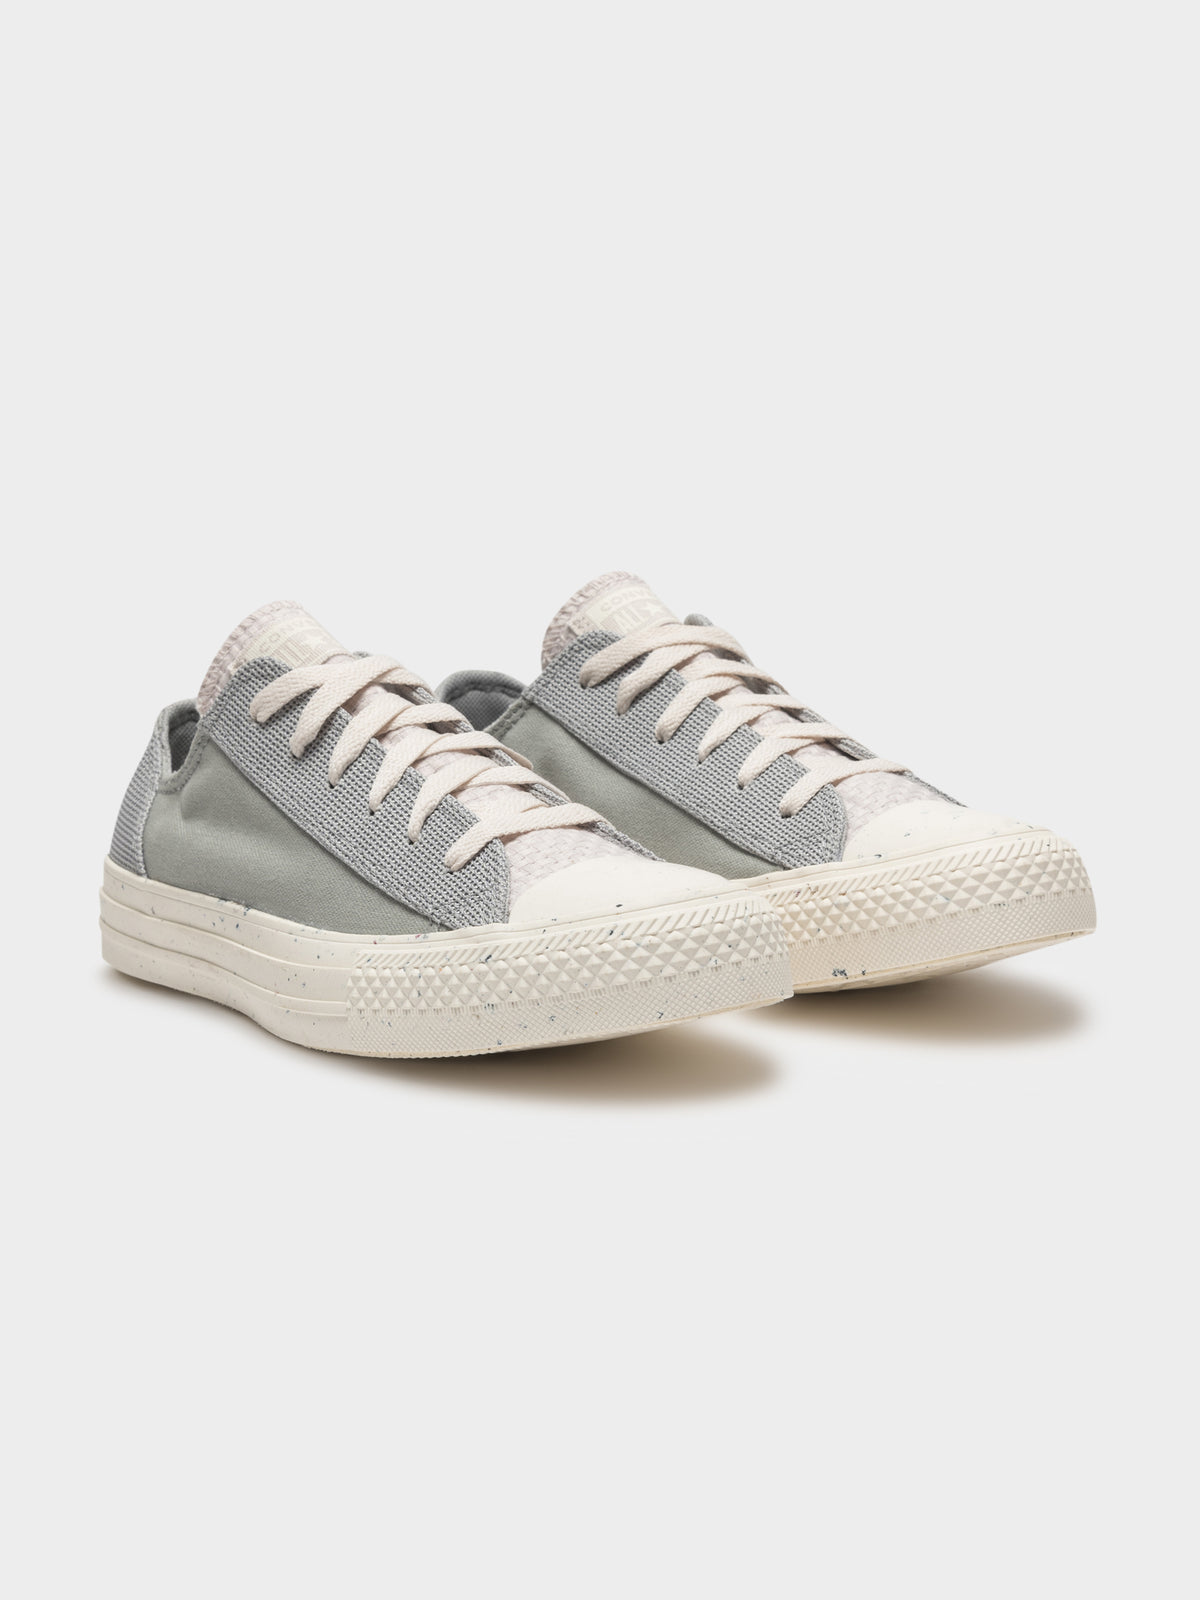 Unisex Chuck Taylor All Star Ox in Grey and Off White